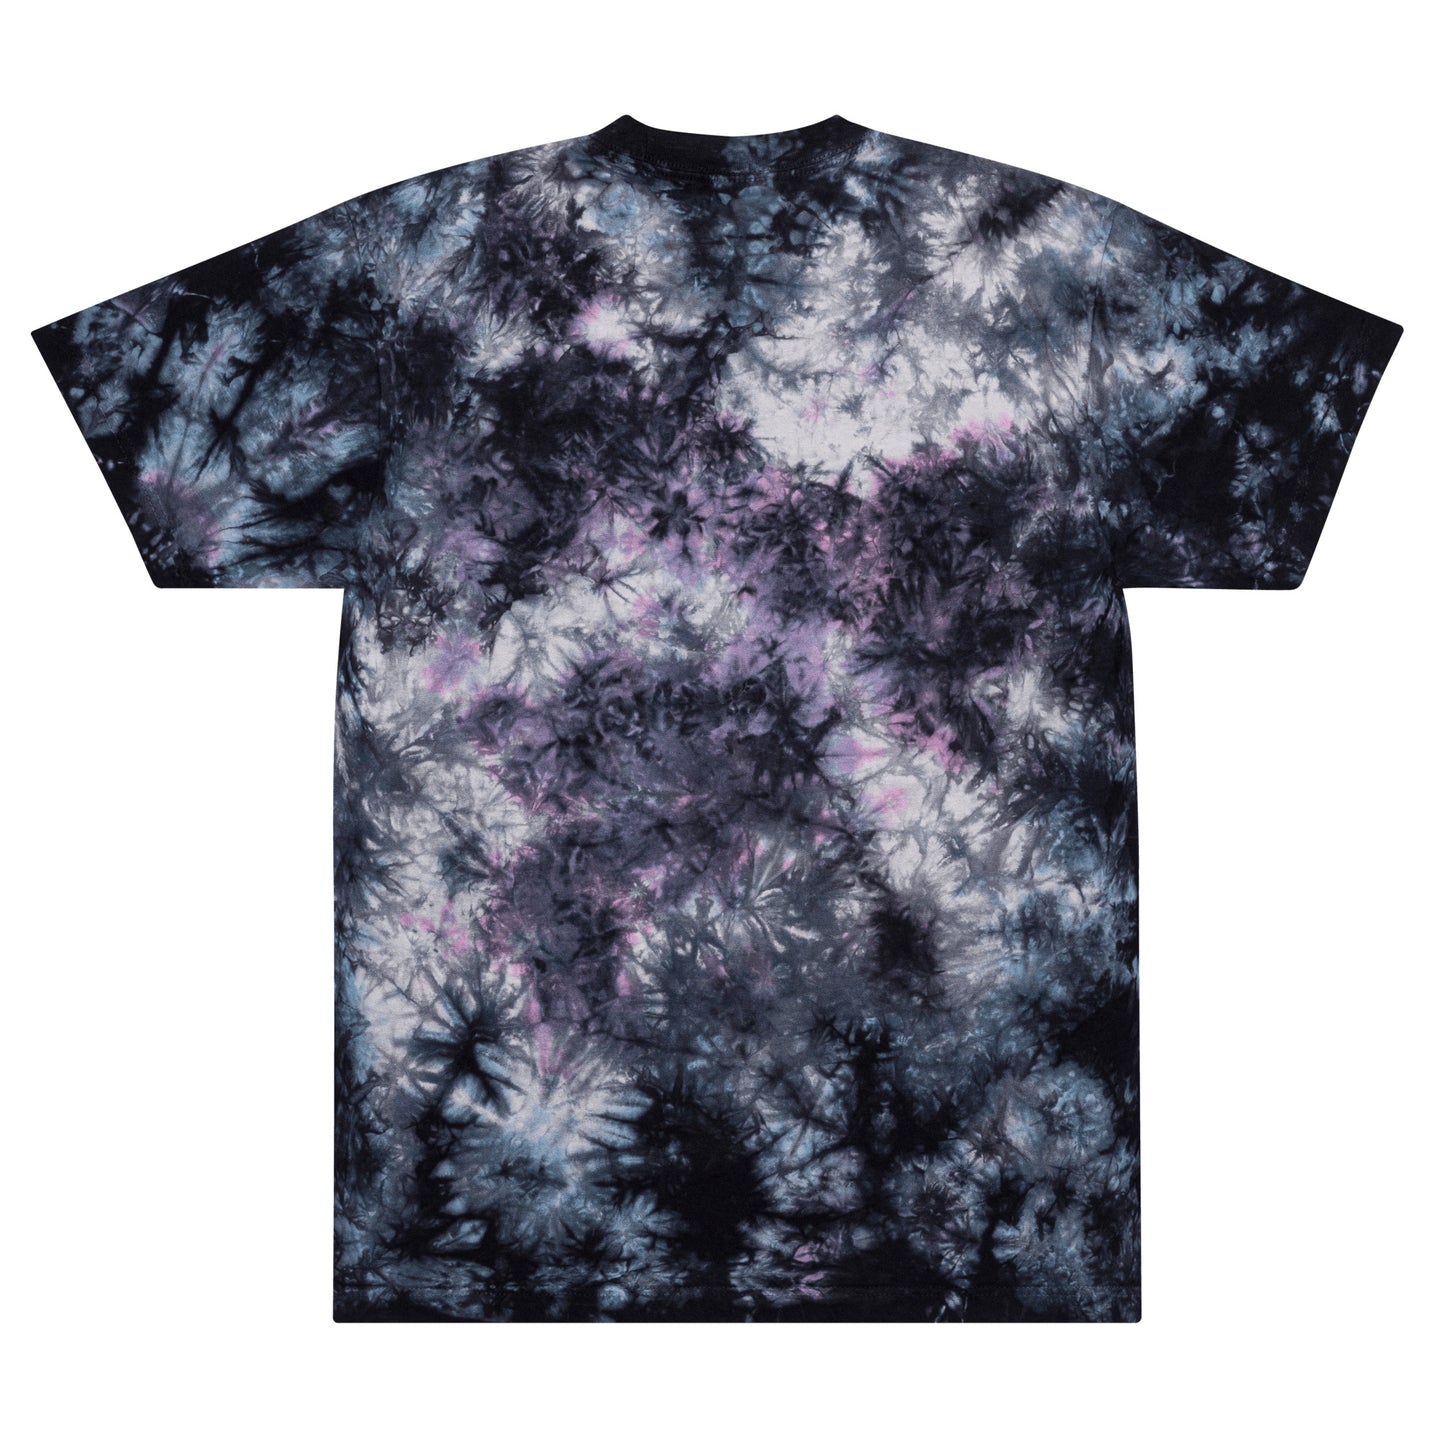 Stand With Israel T-shirt tie-dye unisexe surdimensionné